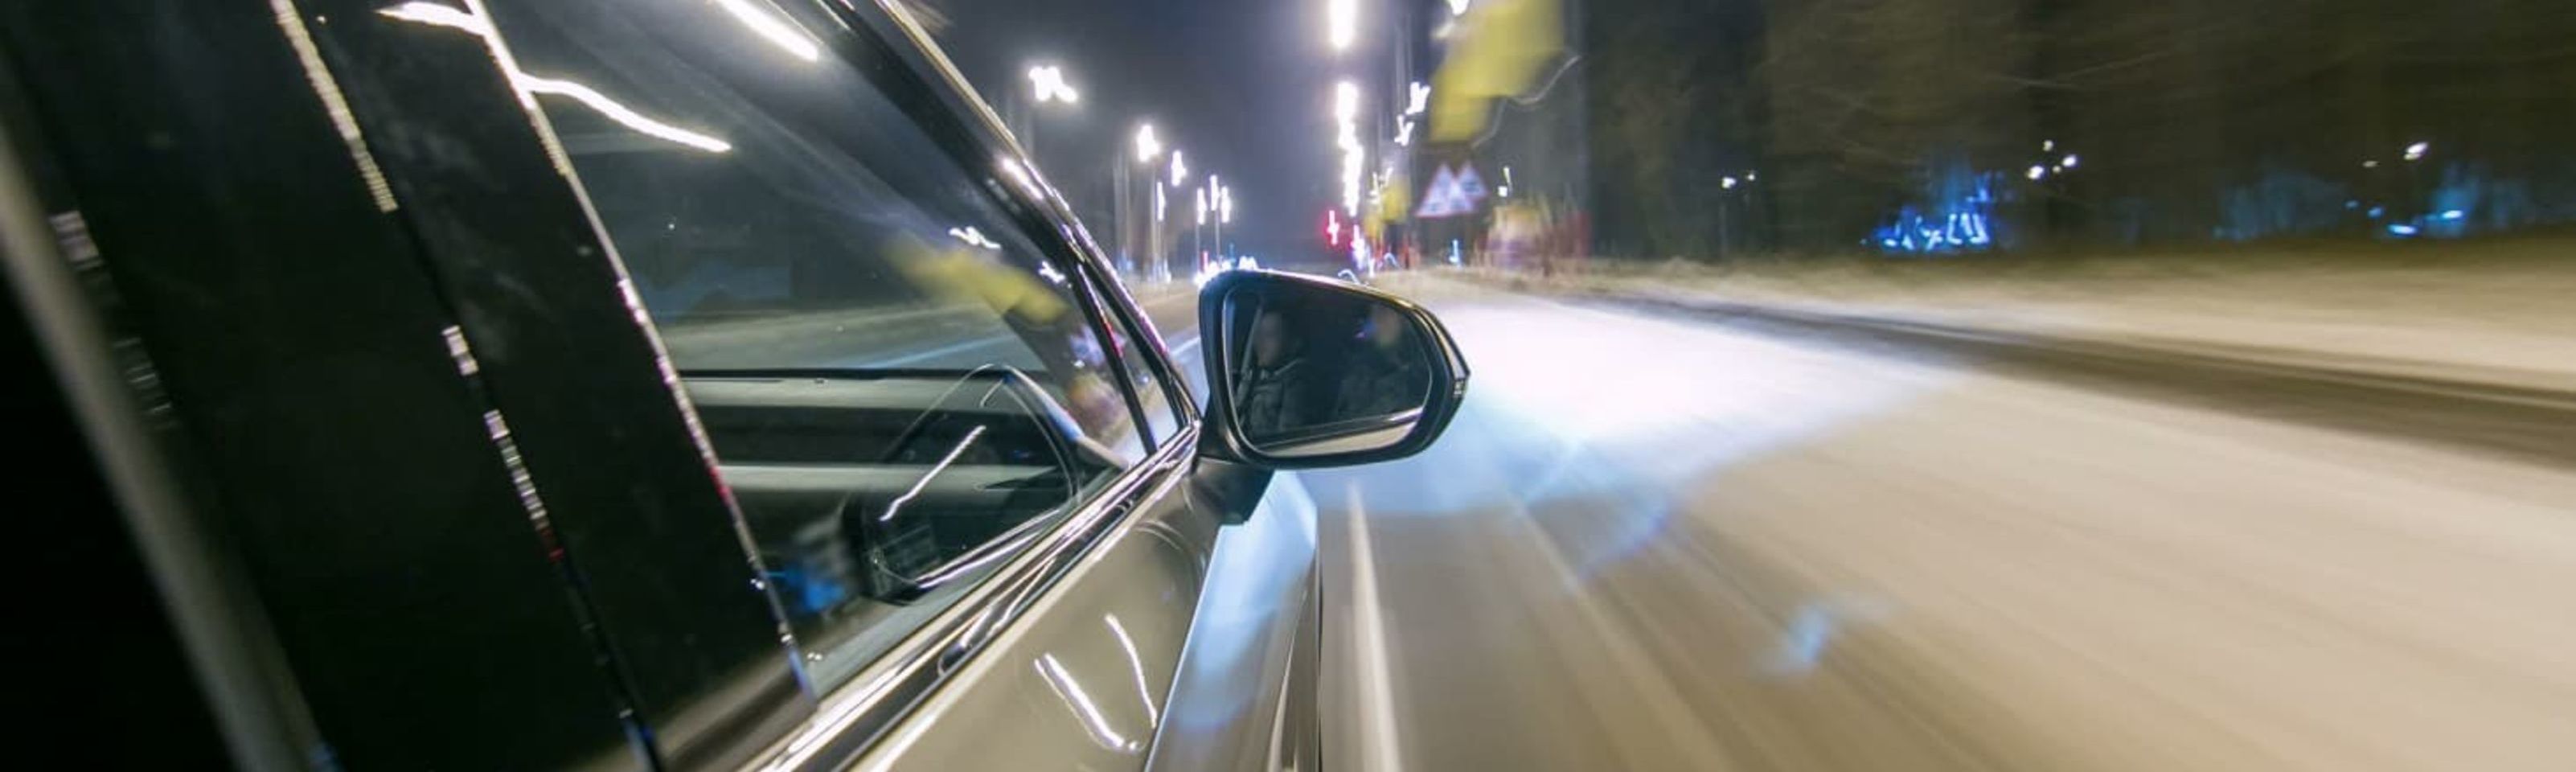 Our top 4 tips for driving at night safely and effectively